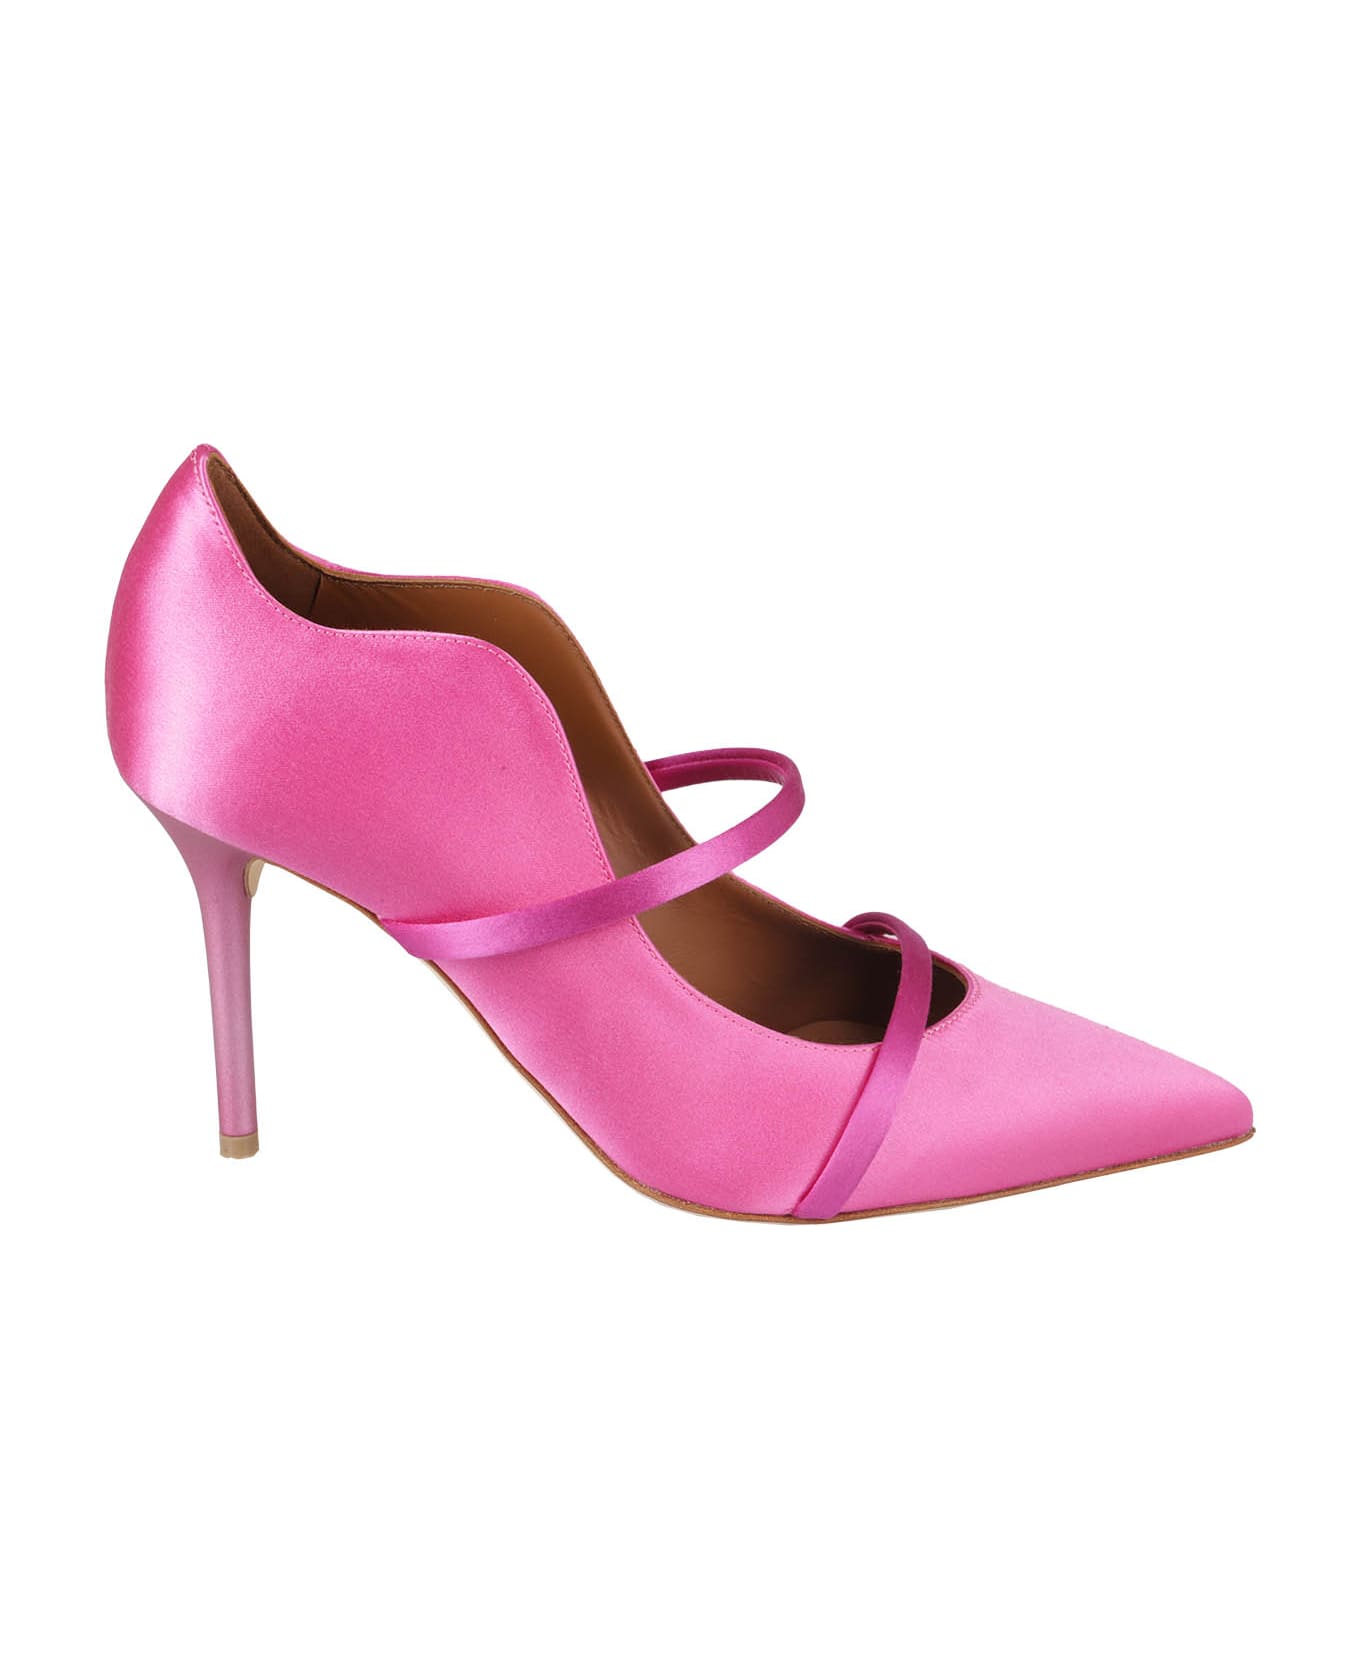 Malone Souliers Satin - Pink Berry ハイヒール